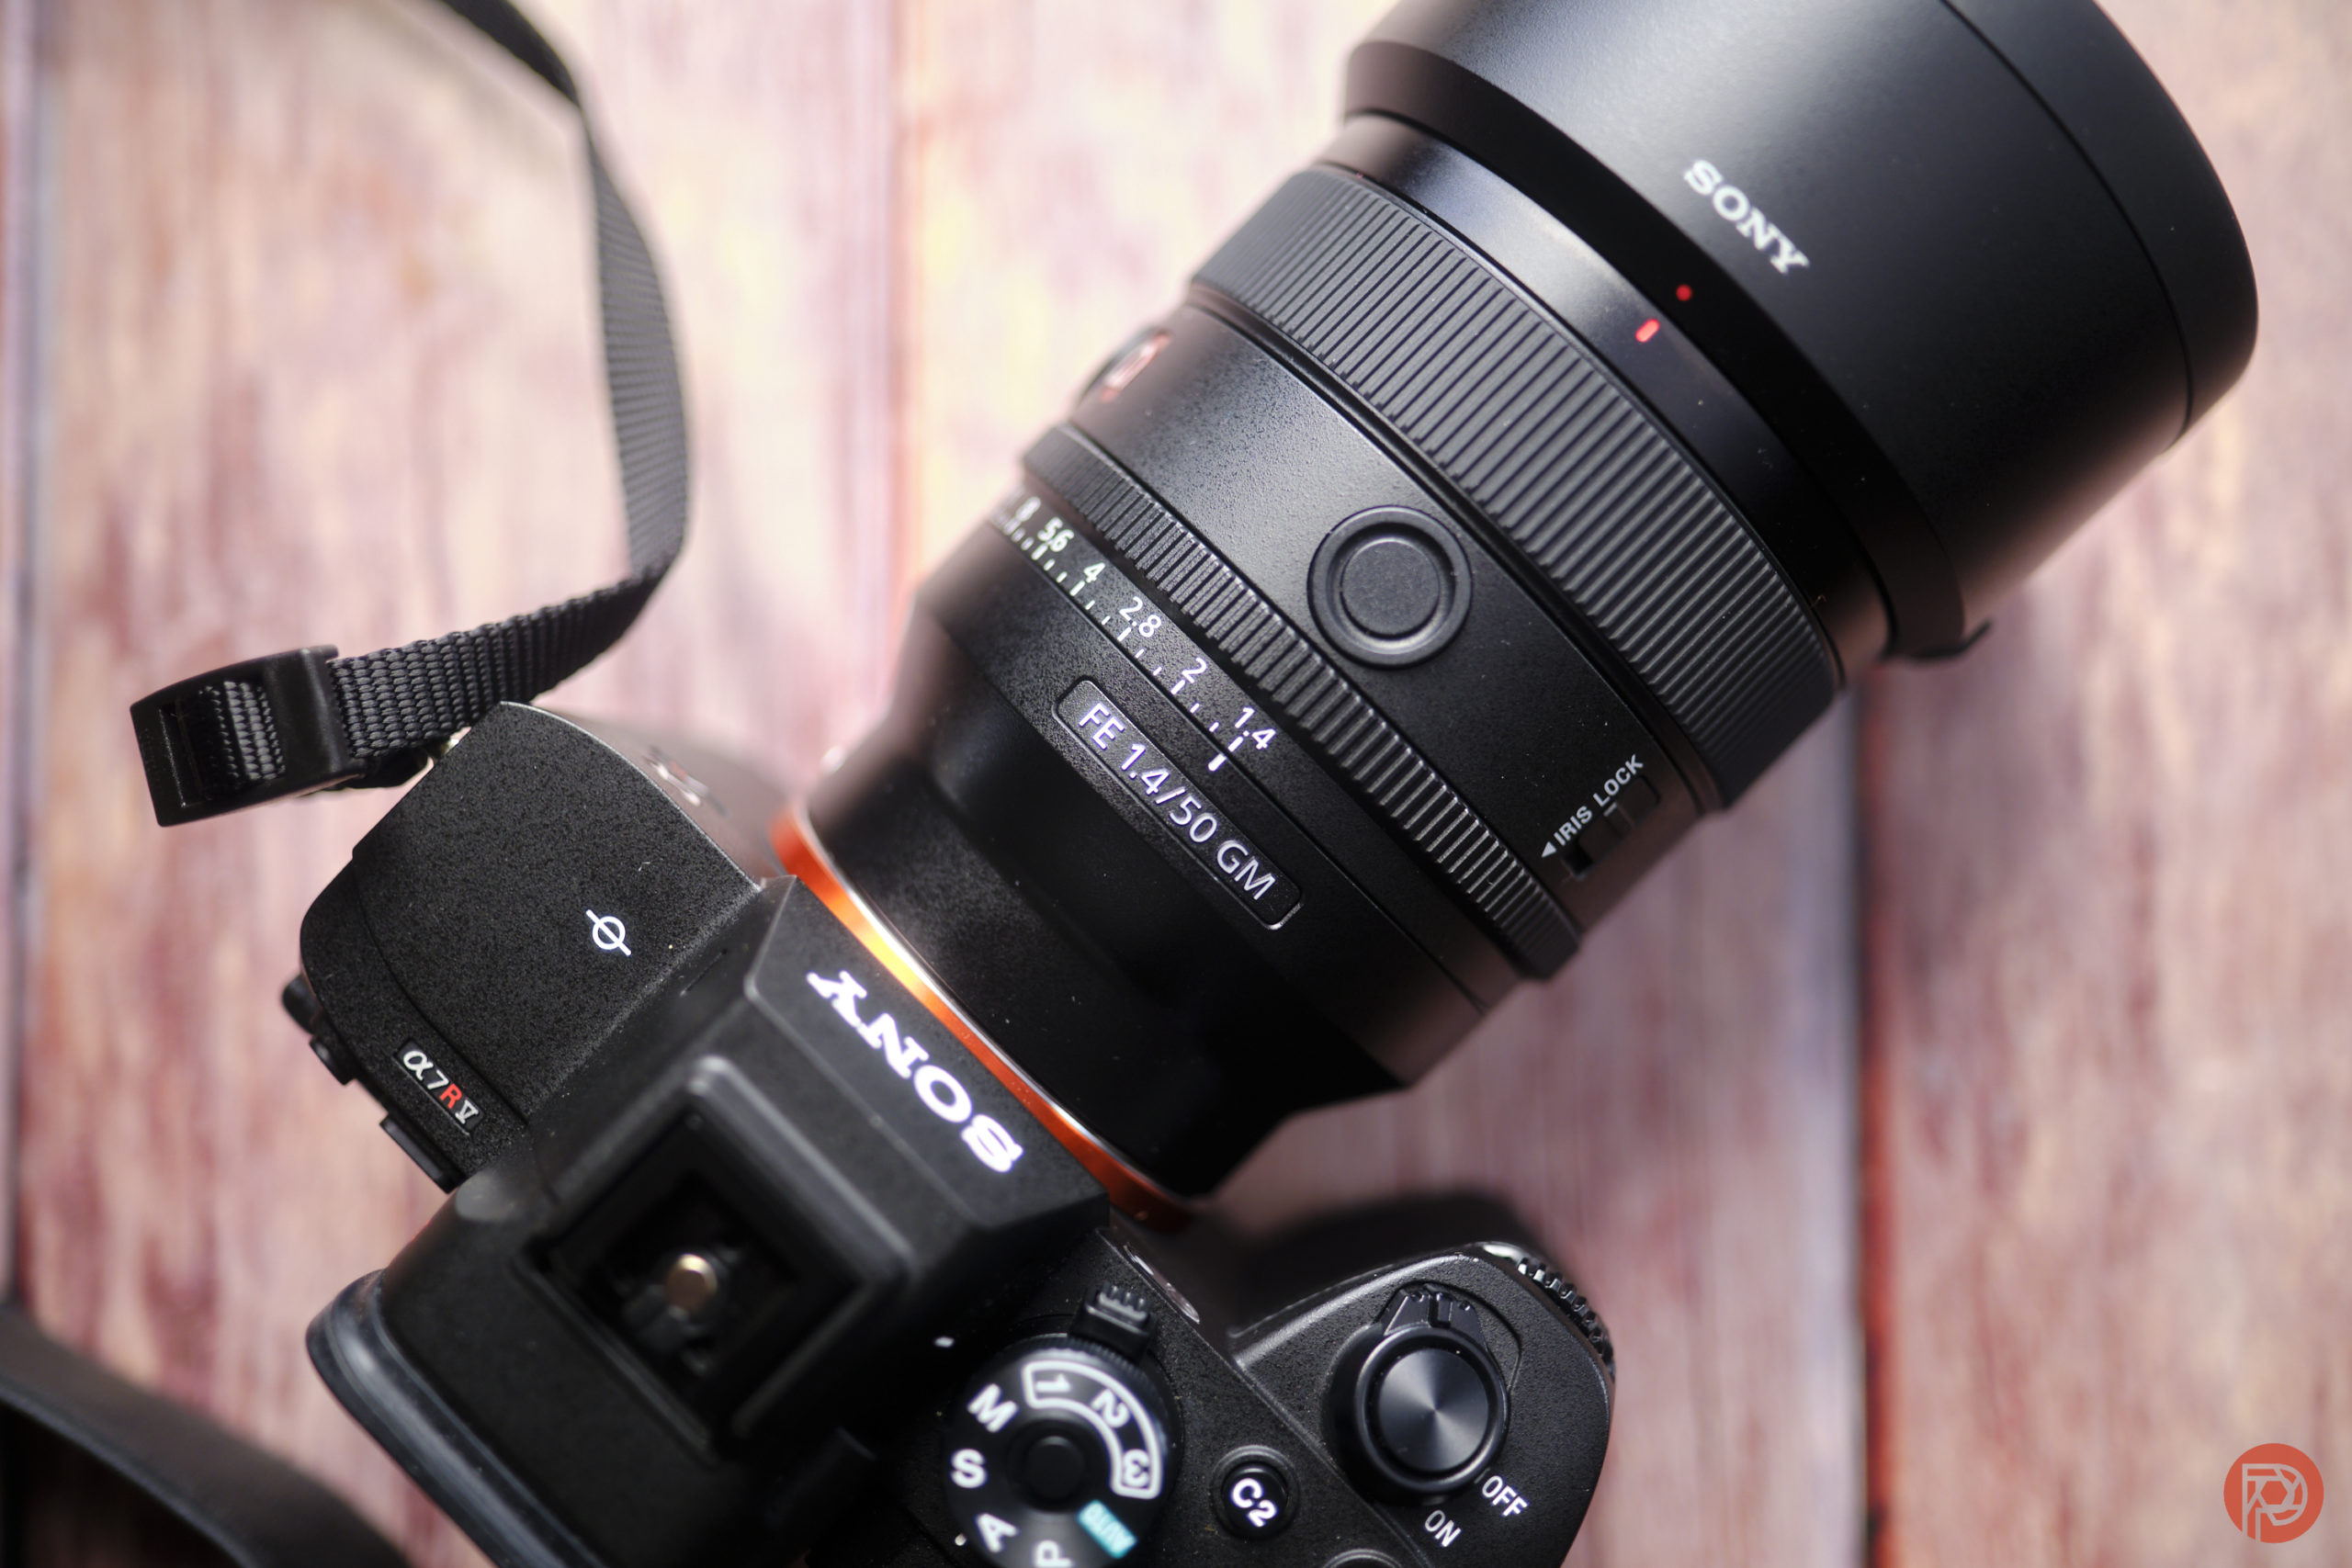 Chris Gampat The Phoblographer Sony 50mm f1.4 G Master Product images 1.41-125s160